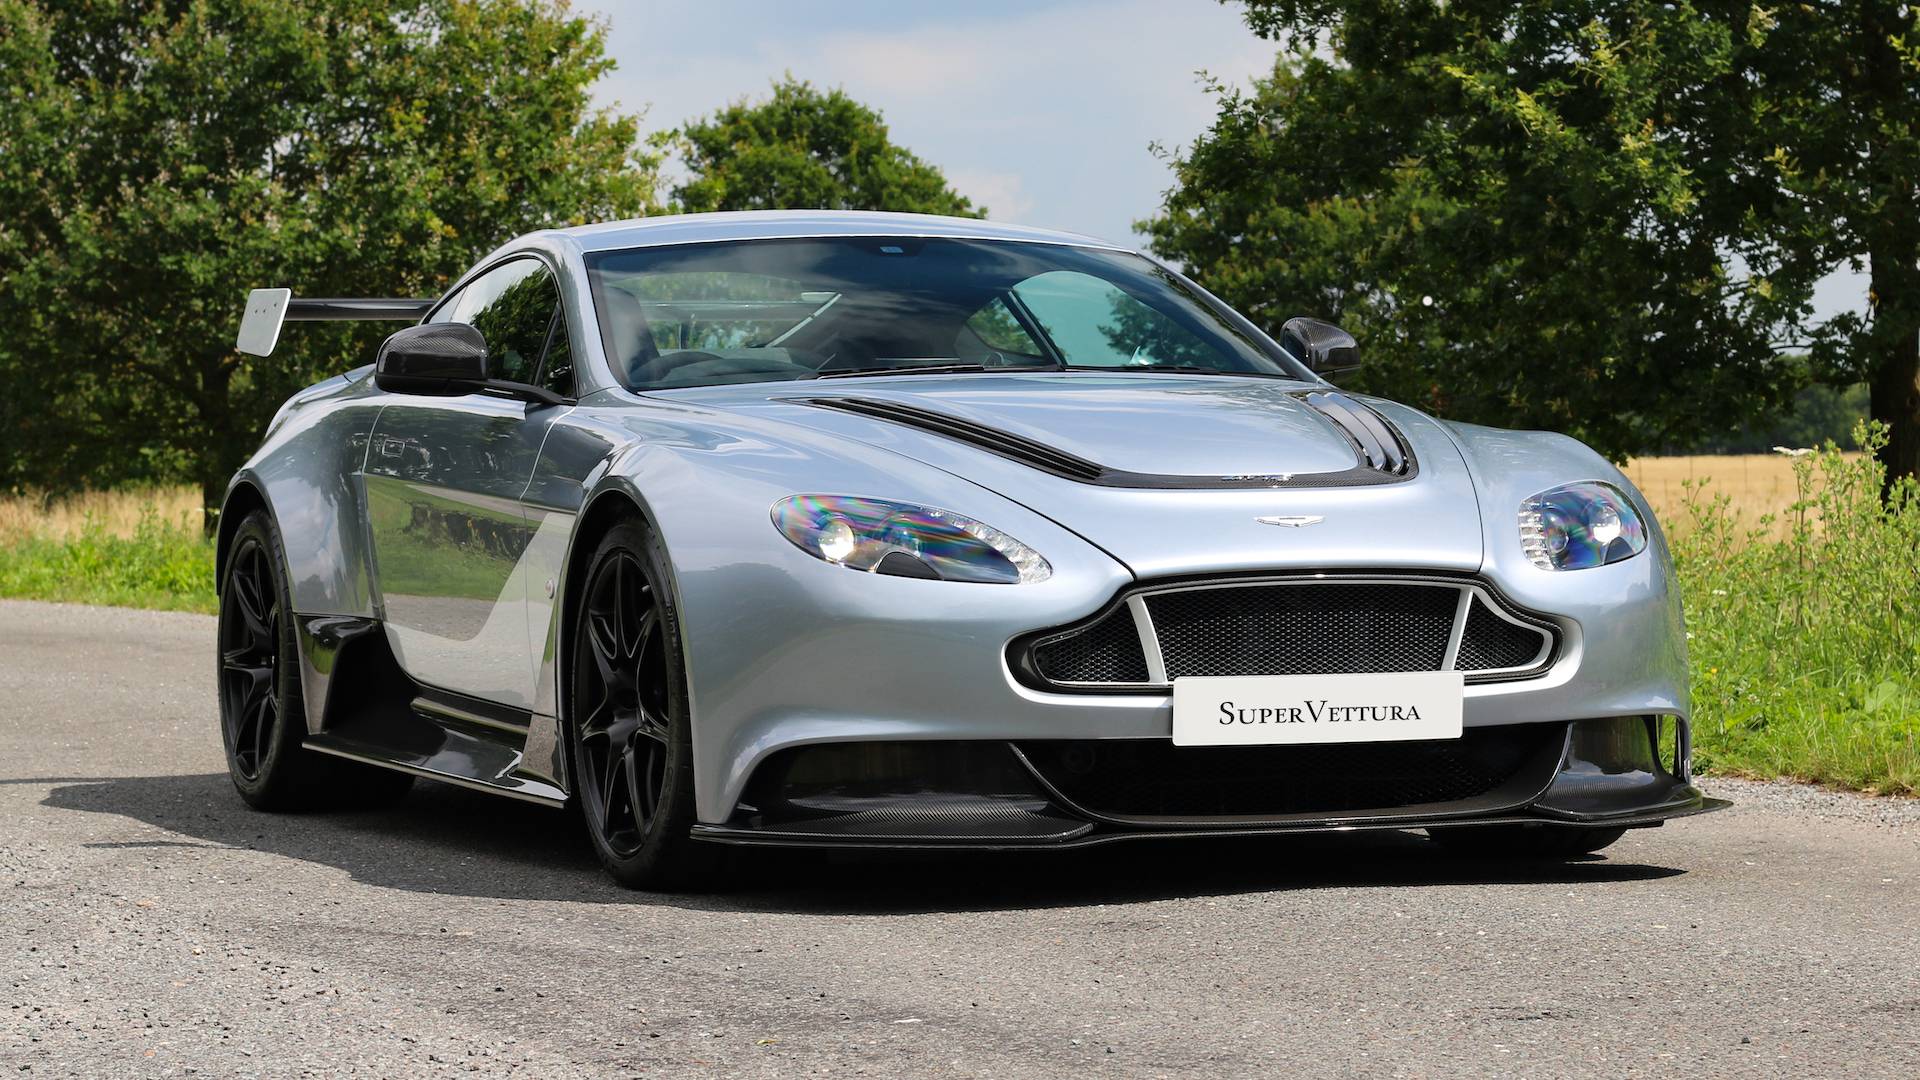 For Sale Aston Martin Vantage Gt12 15 Offered For Gbp 329 950